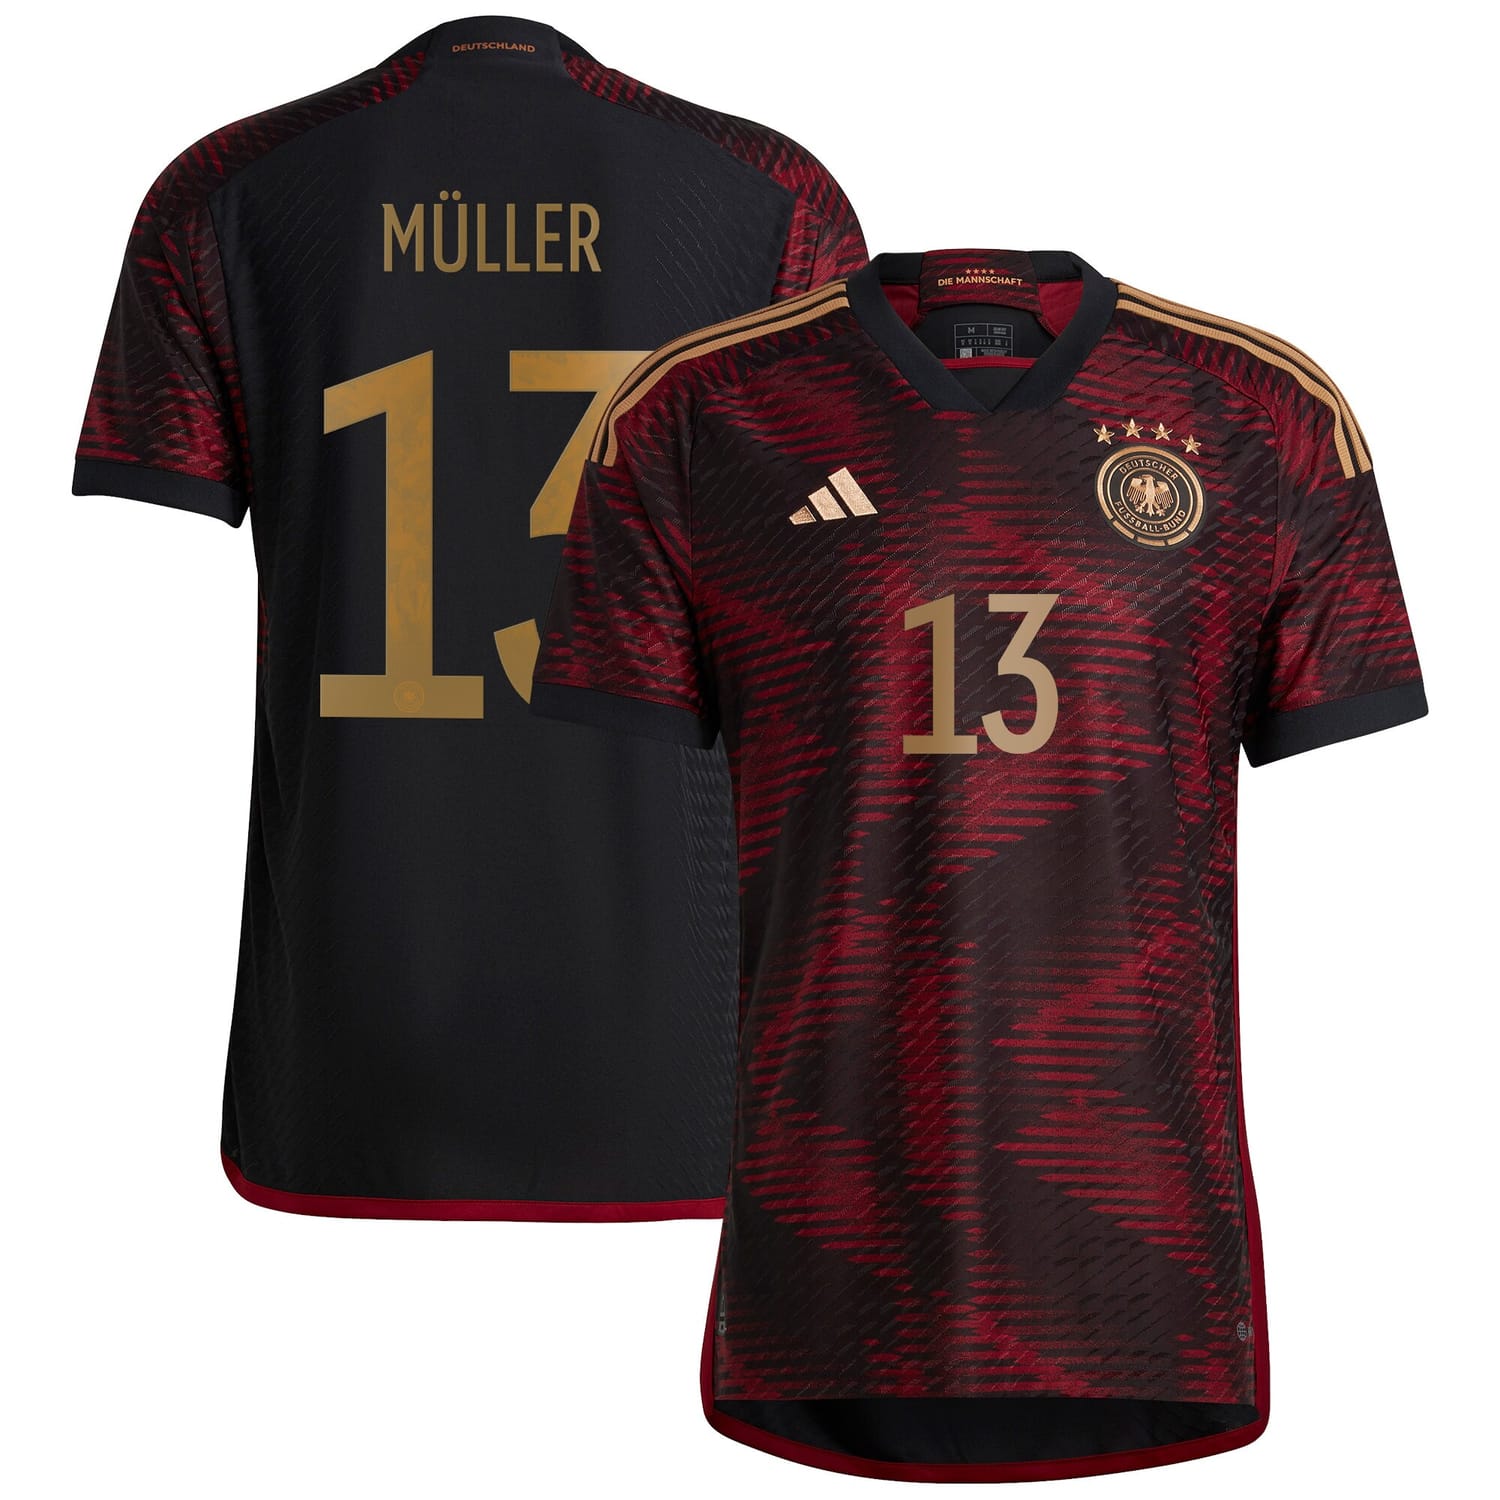 Germany National Team Away Authentic Jersey Shirt player Thomas Müller 13 printing for Men